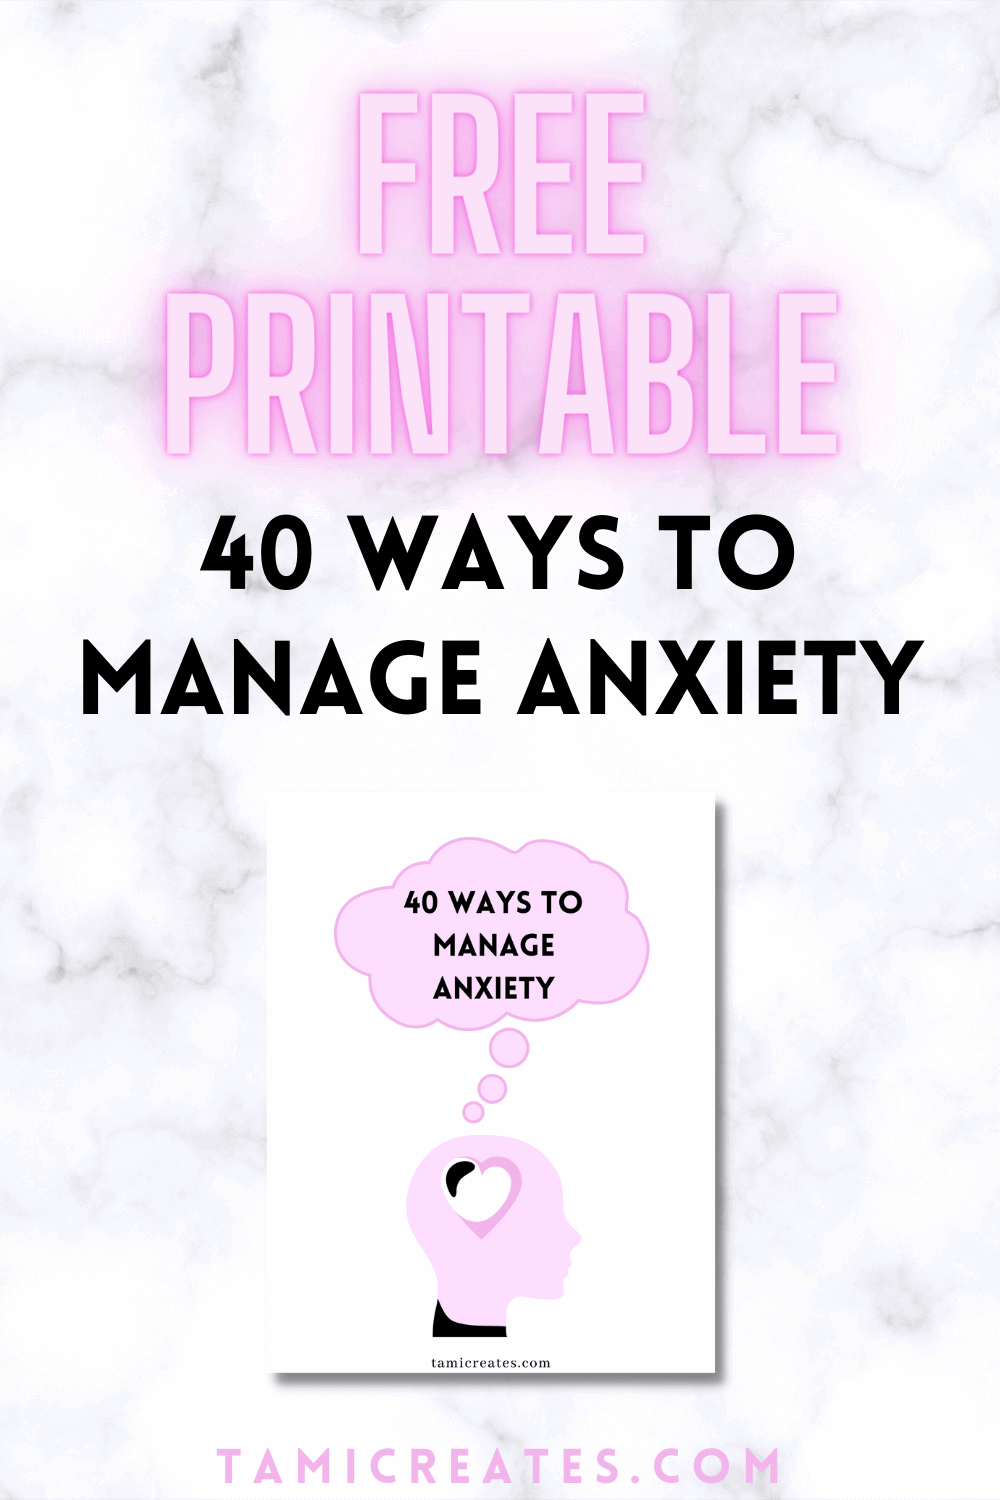 If you struggle with anxiety or panic disorder, you need this list! Here are 40 ways to manage anxiety when it's getting the best of you, plus a FREE printable list to always keep handy.